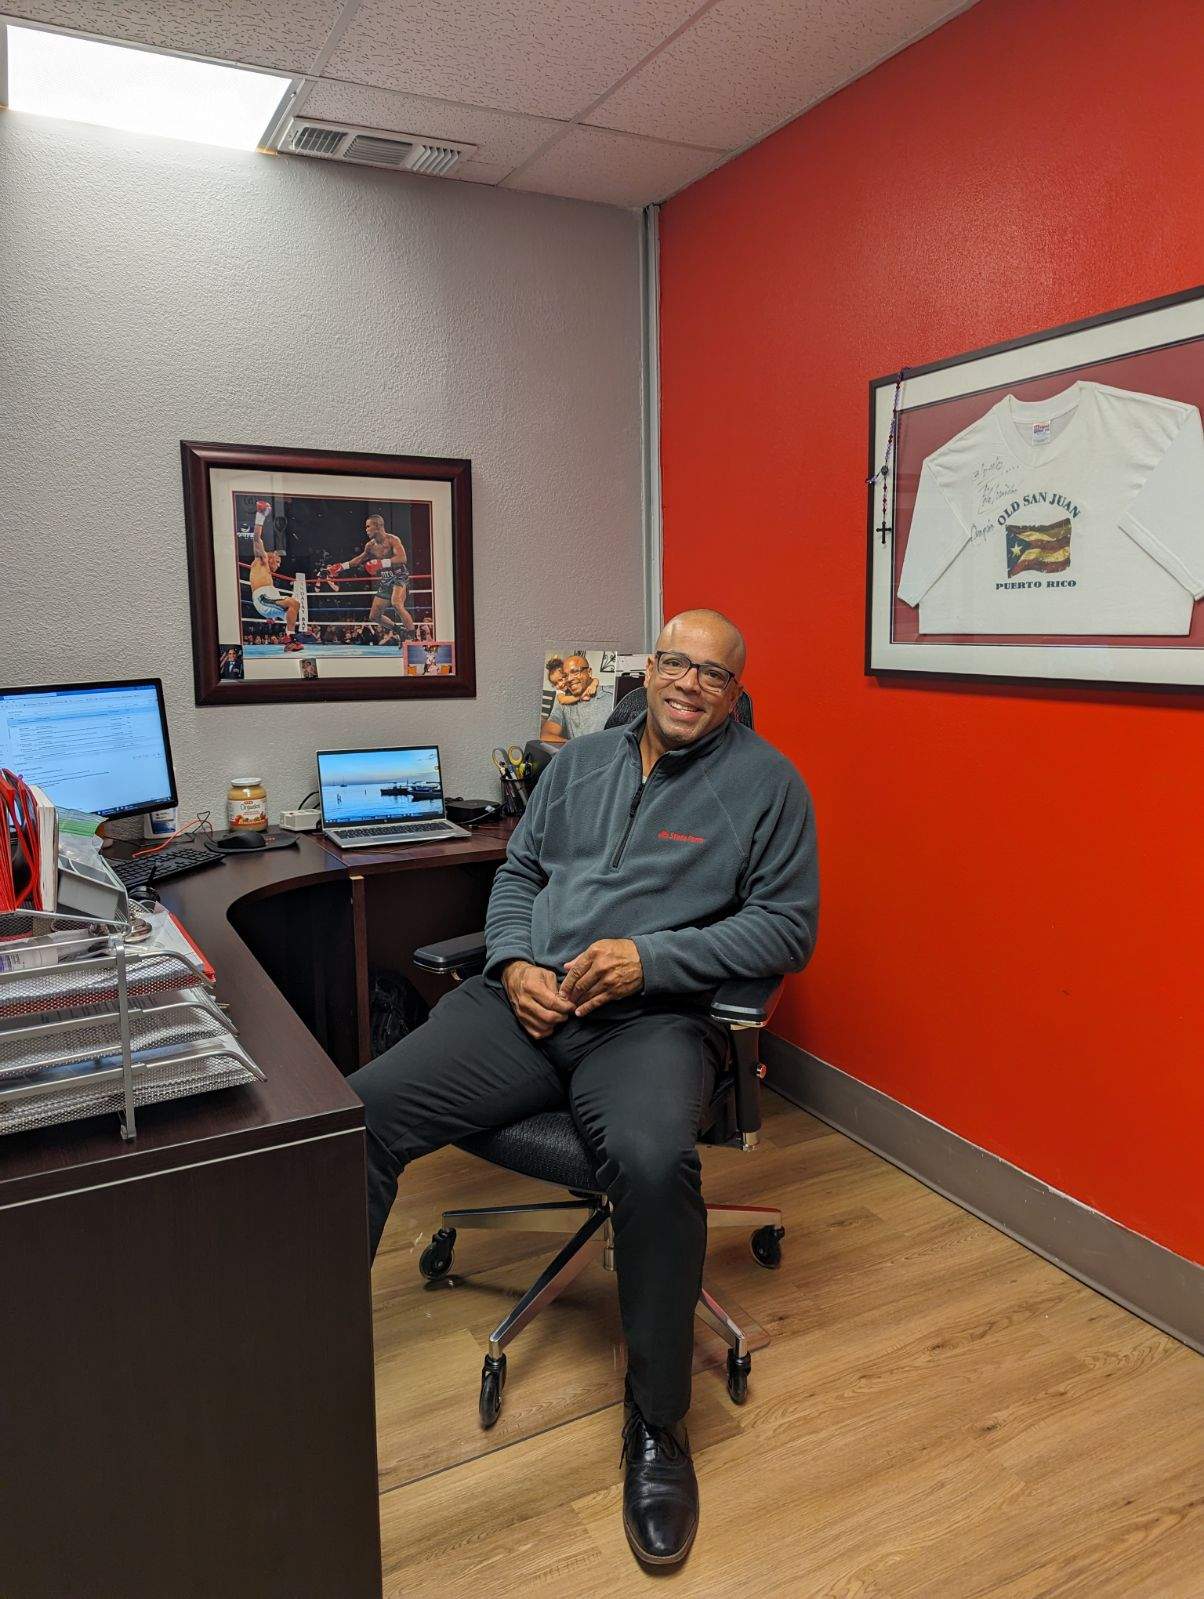 My team and I would love to help you with your insurance needs! Give us a call today. Ivan Cosme - State Farm Insurance Agent San Antonio (210)673-6970